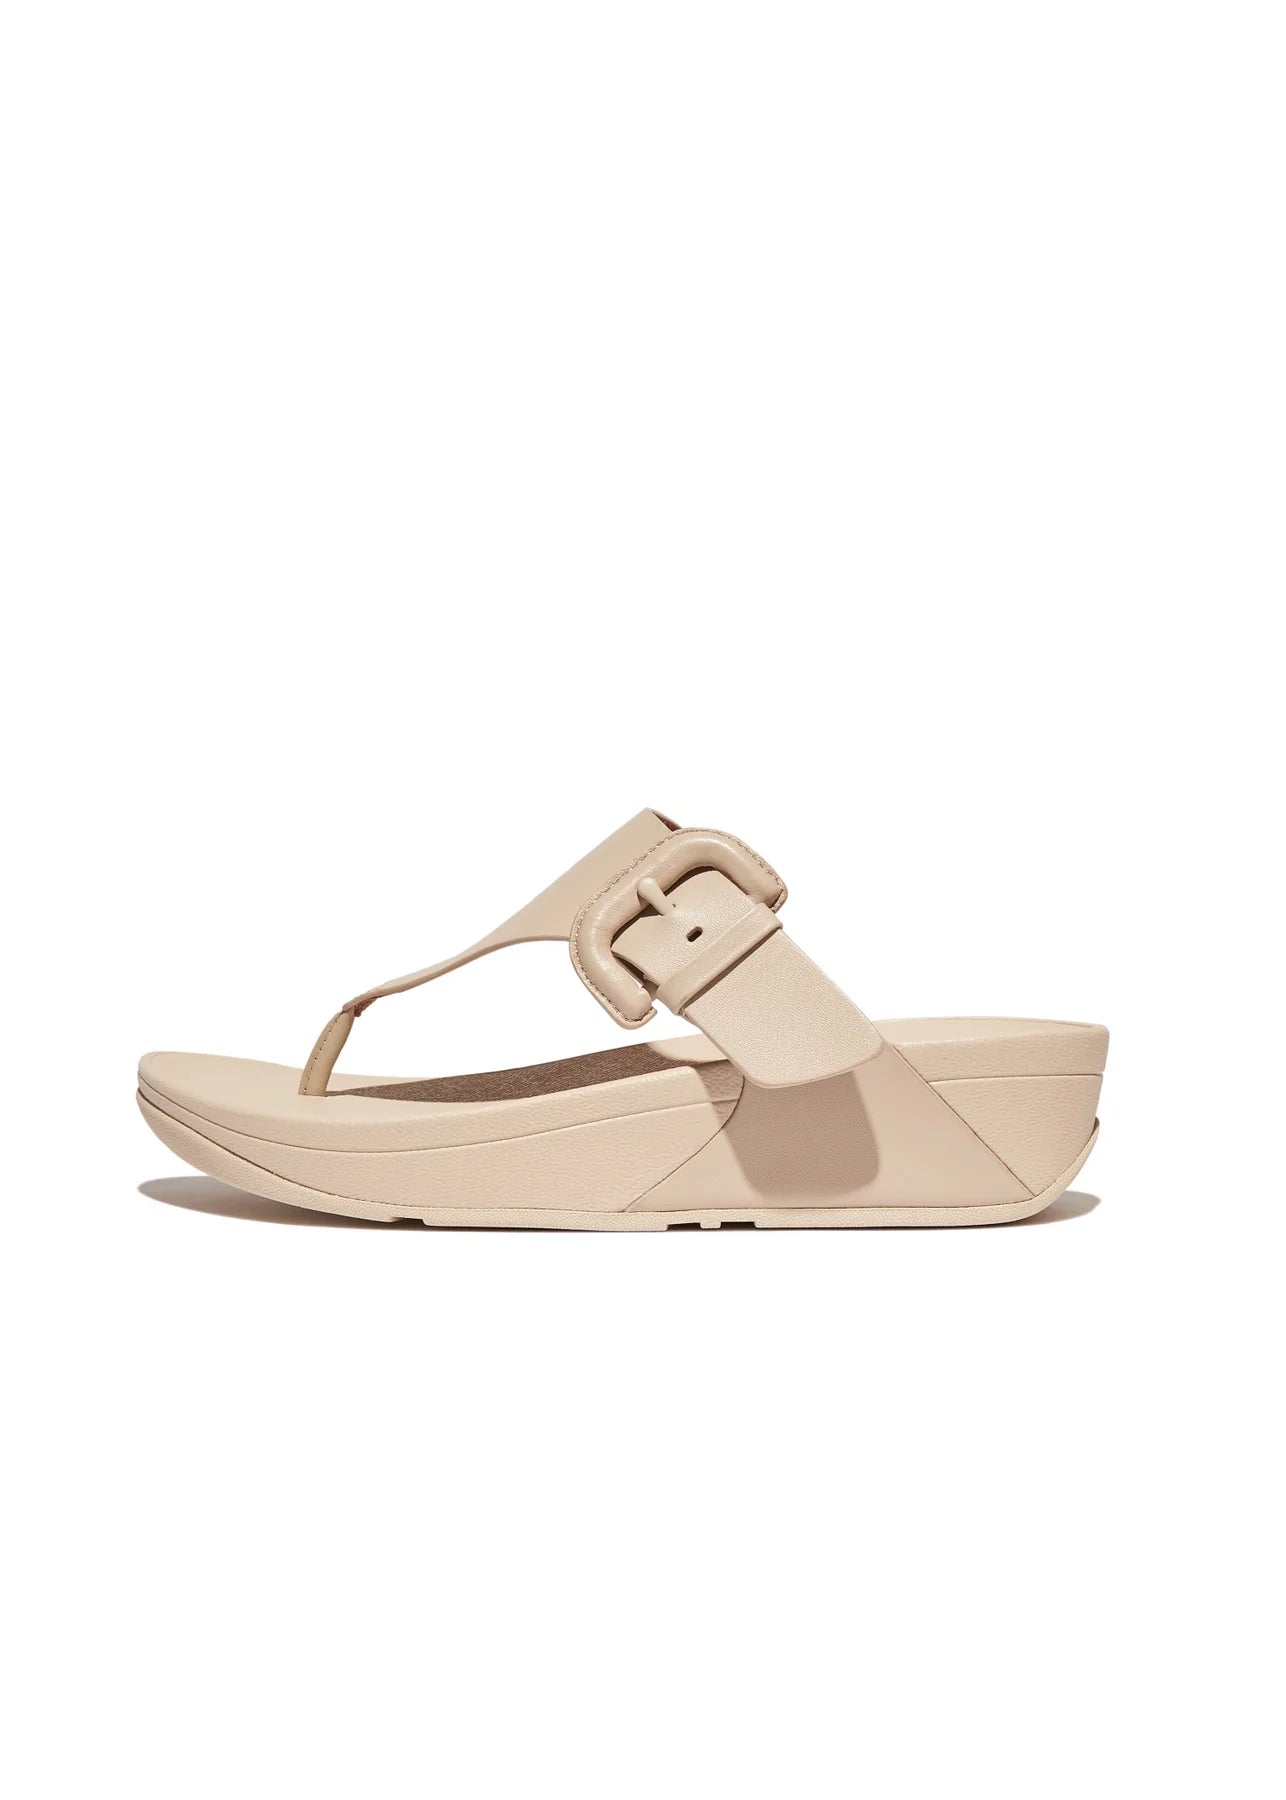 Fitflop Covered-Buckle Flip Flop